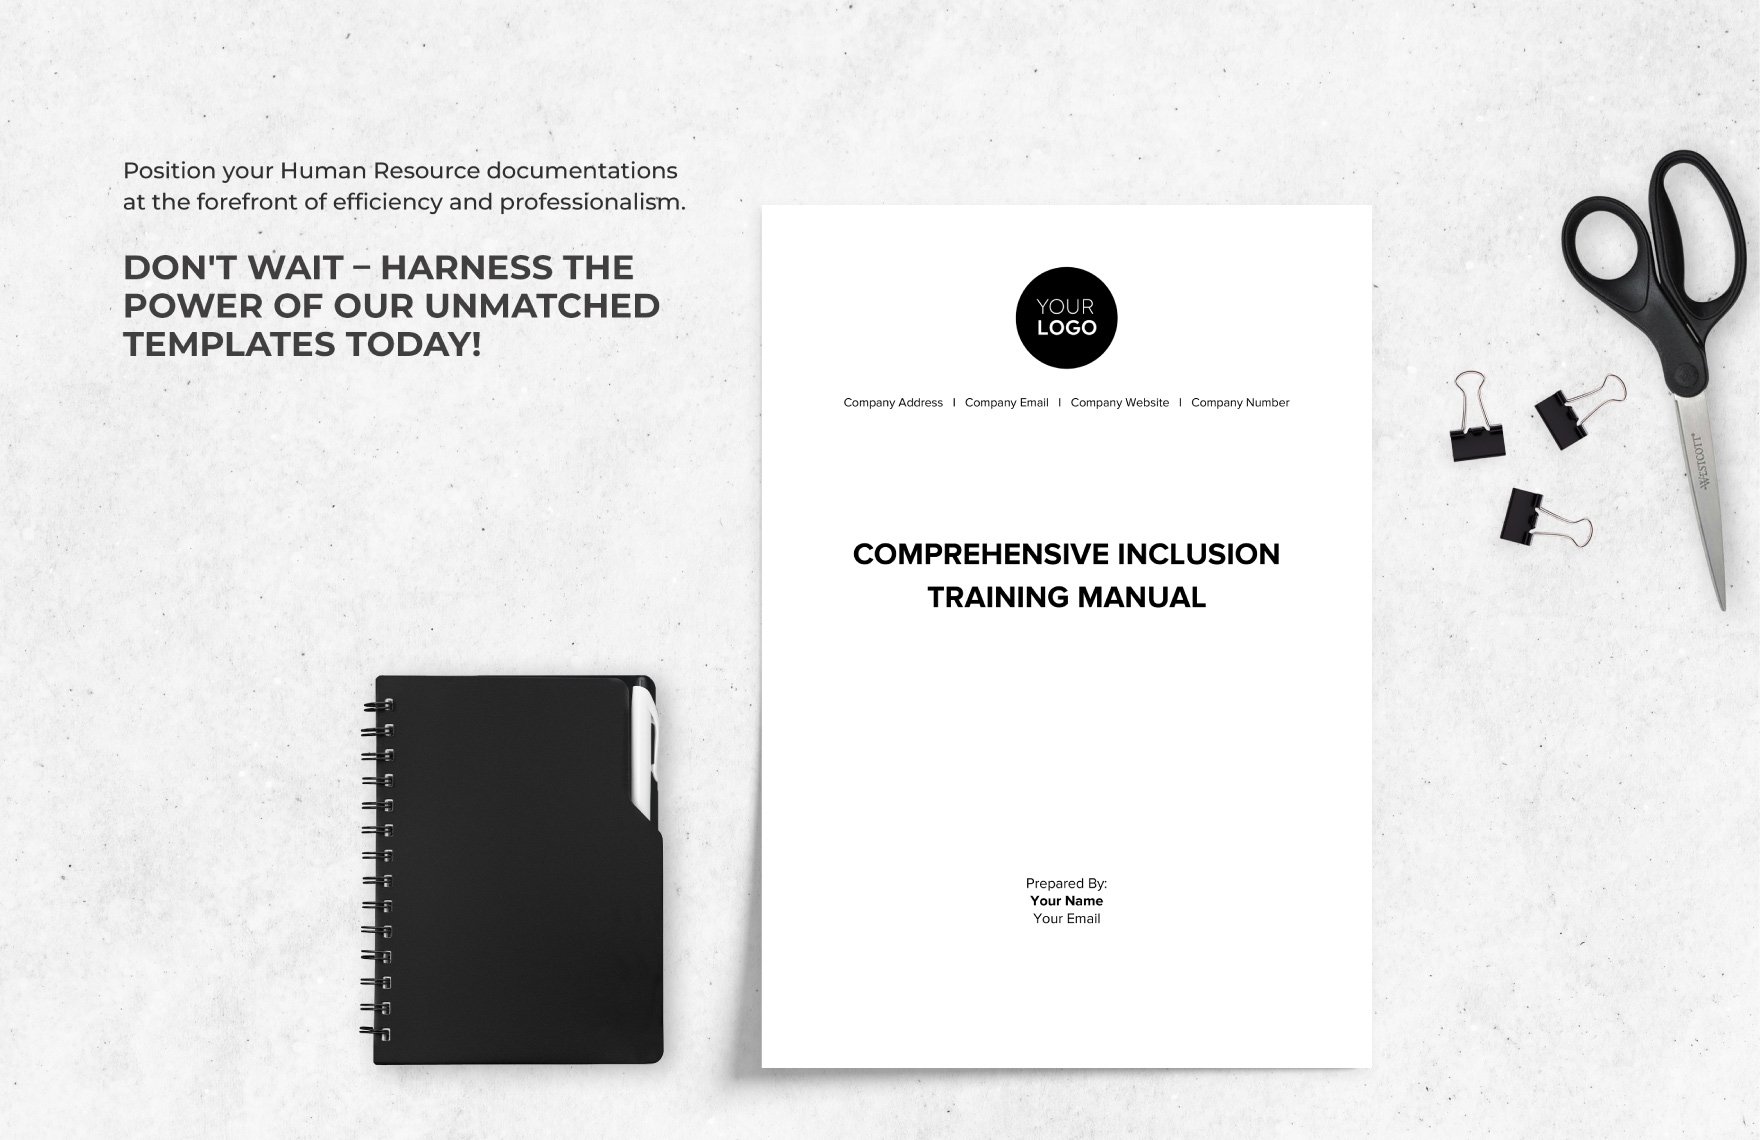 Comprehensive Inclusion Training Manual HR Template